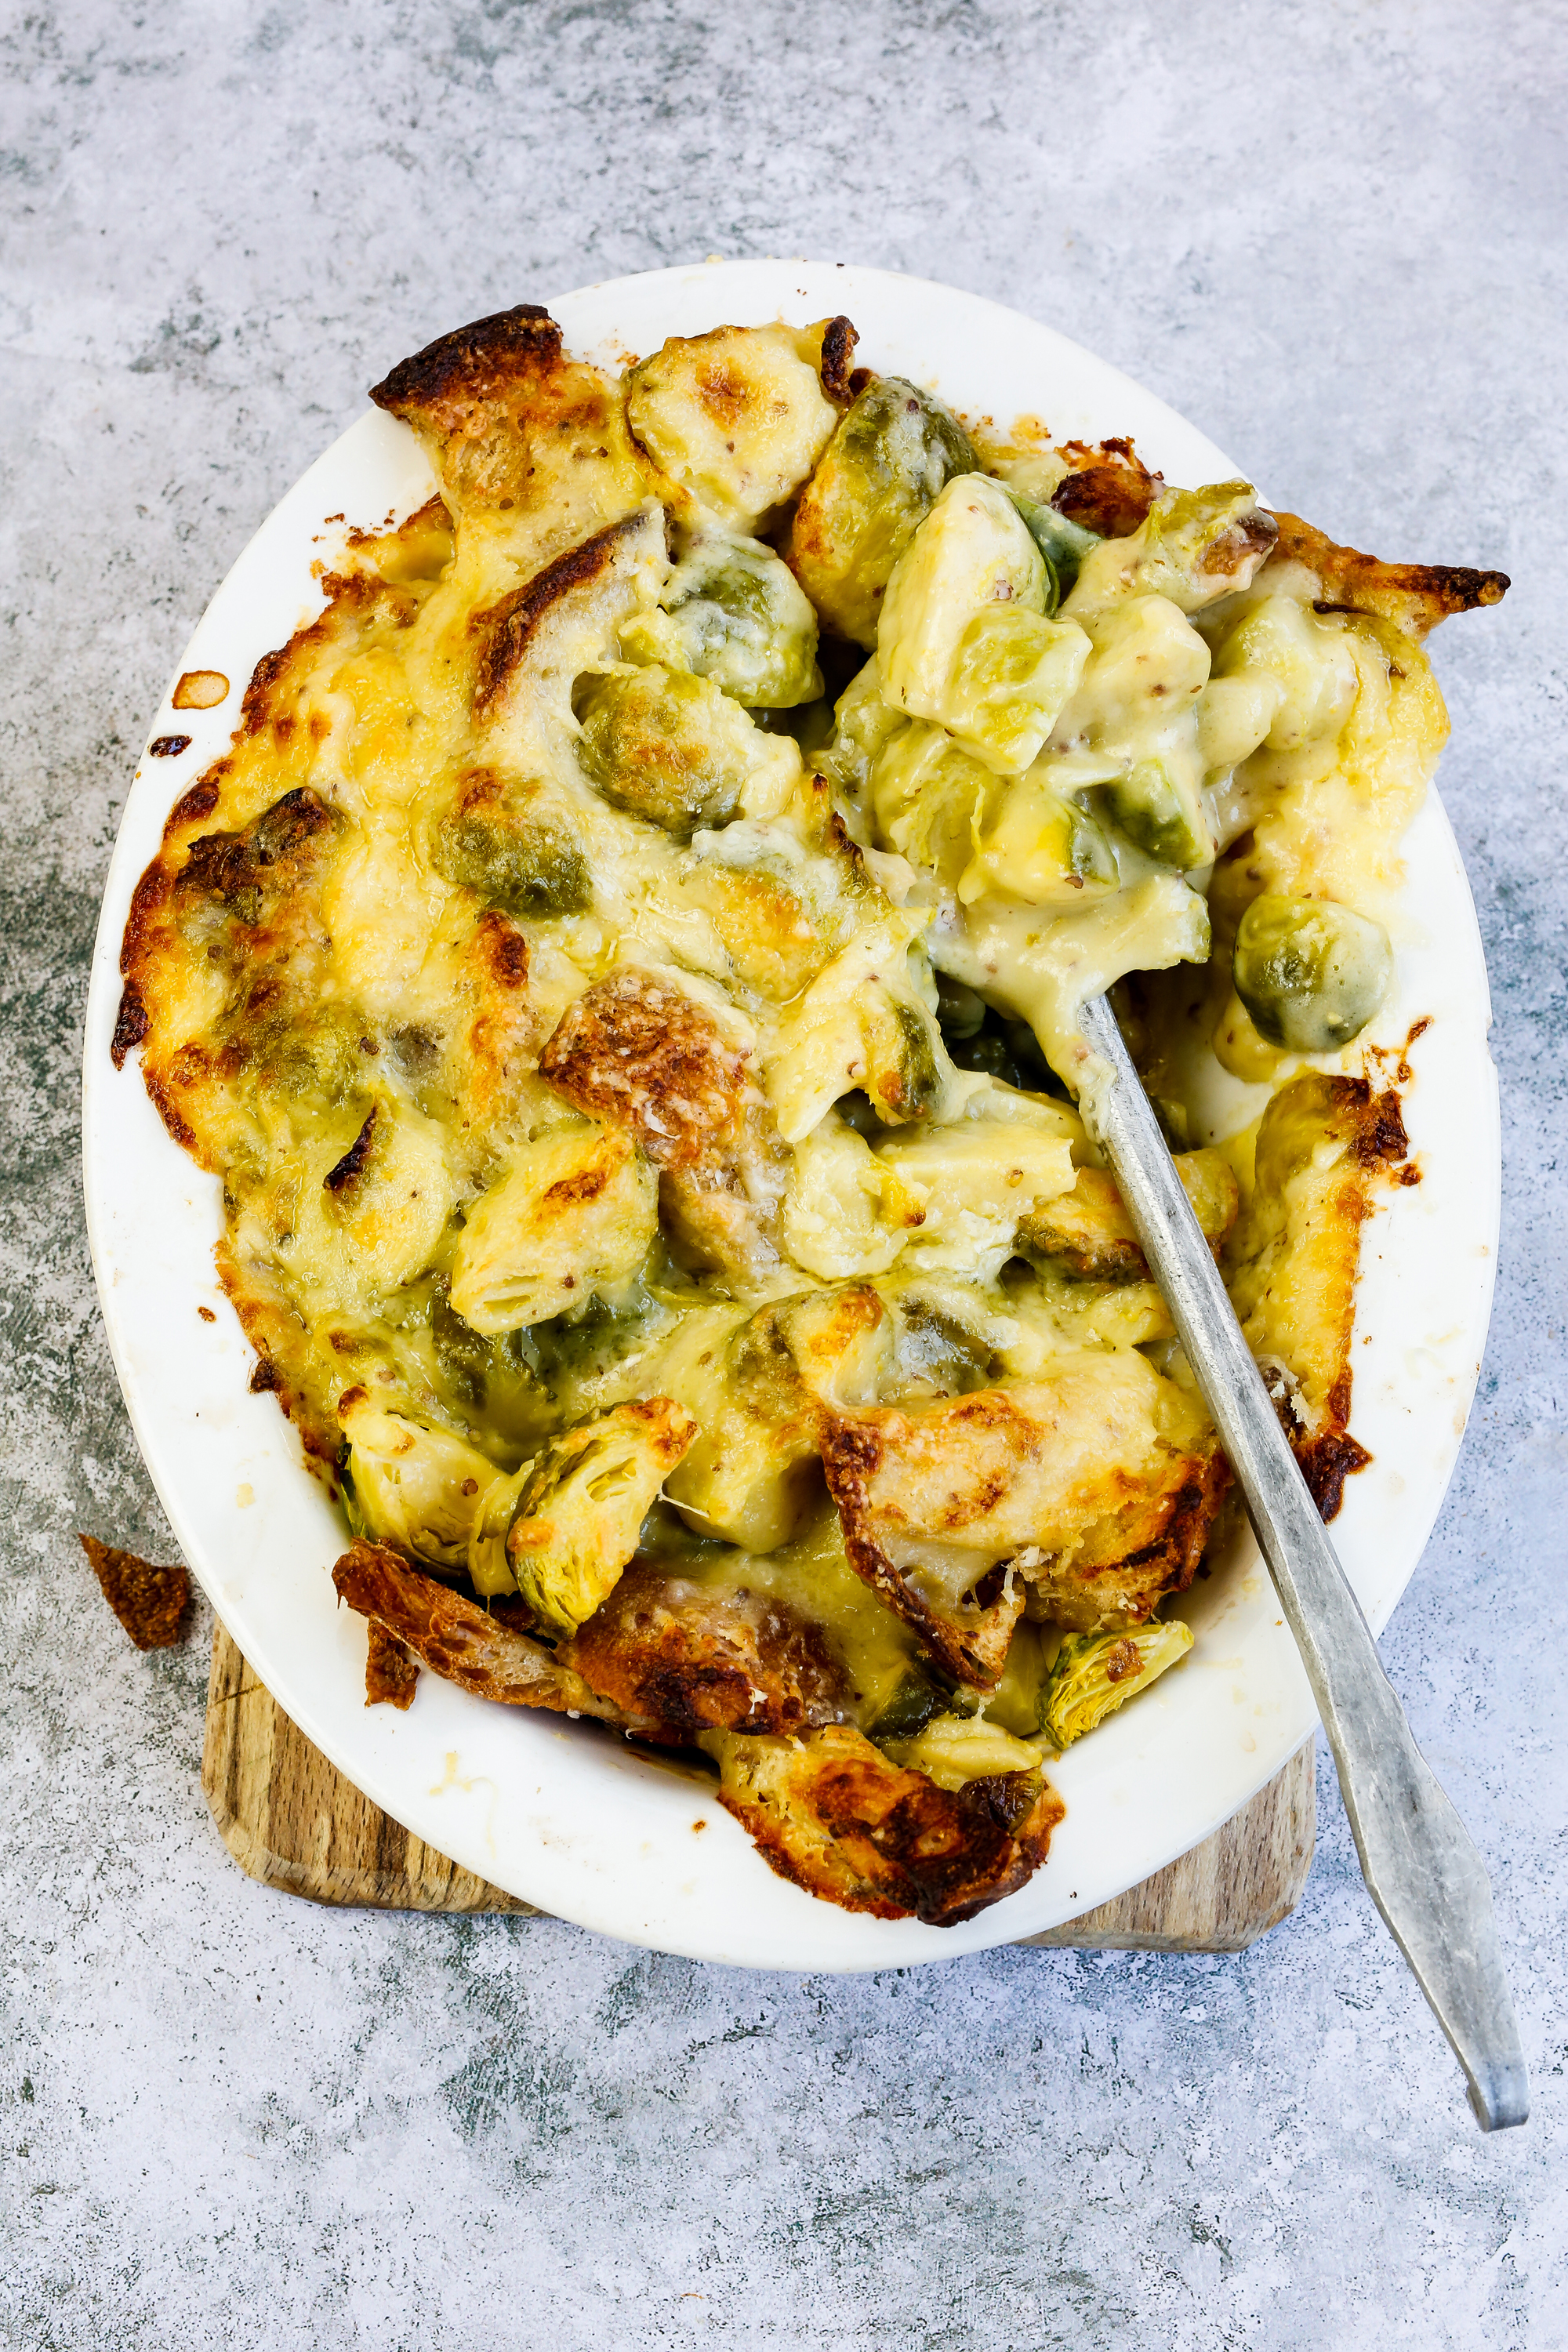 Savoury Bread Pudding with Cheesy Sprouts from The Complete Vegetable Cookbook: A Seasonal, Zero-waste Guide to Cooking with Vegetables by James Strawbridge (DK/PA)